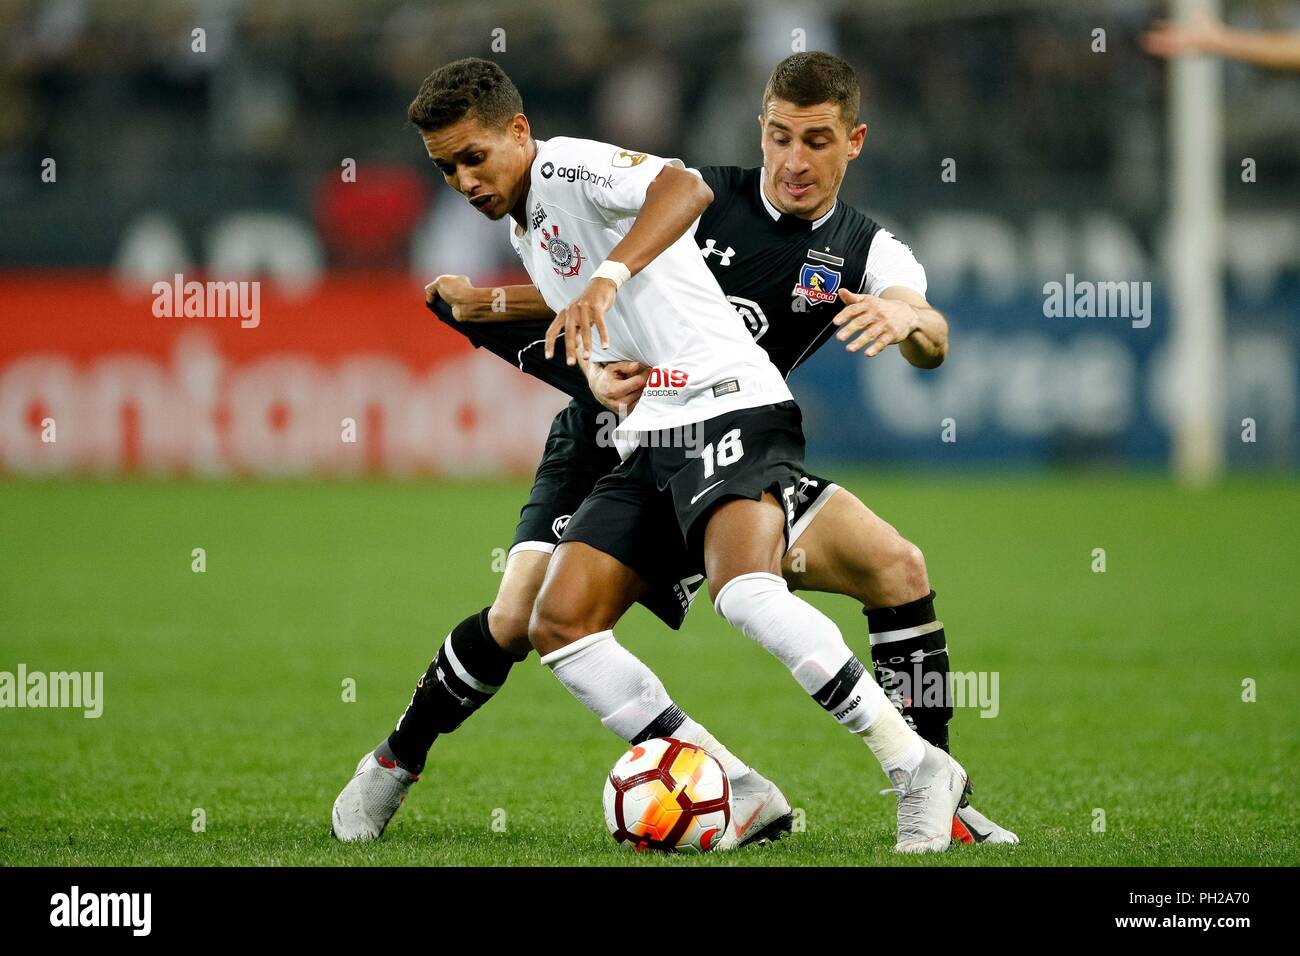 SÃO PAULO, SP - 29.08.2018: CORINTHIANS X COLO COLO - Pedrinho of Corinthians contests ball with Carlos Carmona Tello of Colo Colo during a return match between Corinthians and Colo Colo (Chile) valid for the eighth finals of the Copa Libertadores de America 2018, held at the Corinthians Arena, located in the eastern zone of the capital. (Photo: Marcelo Machado de Melo/Fotoarena) Stock Photo